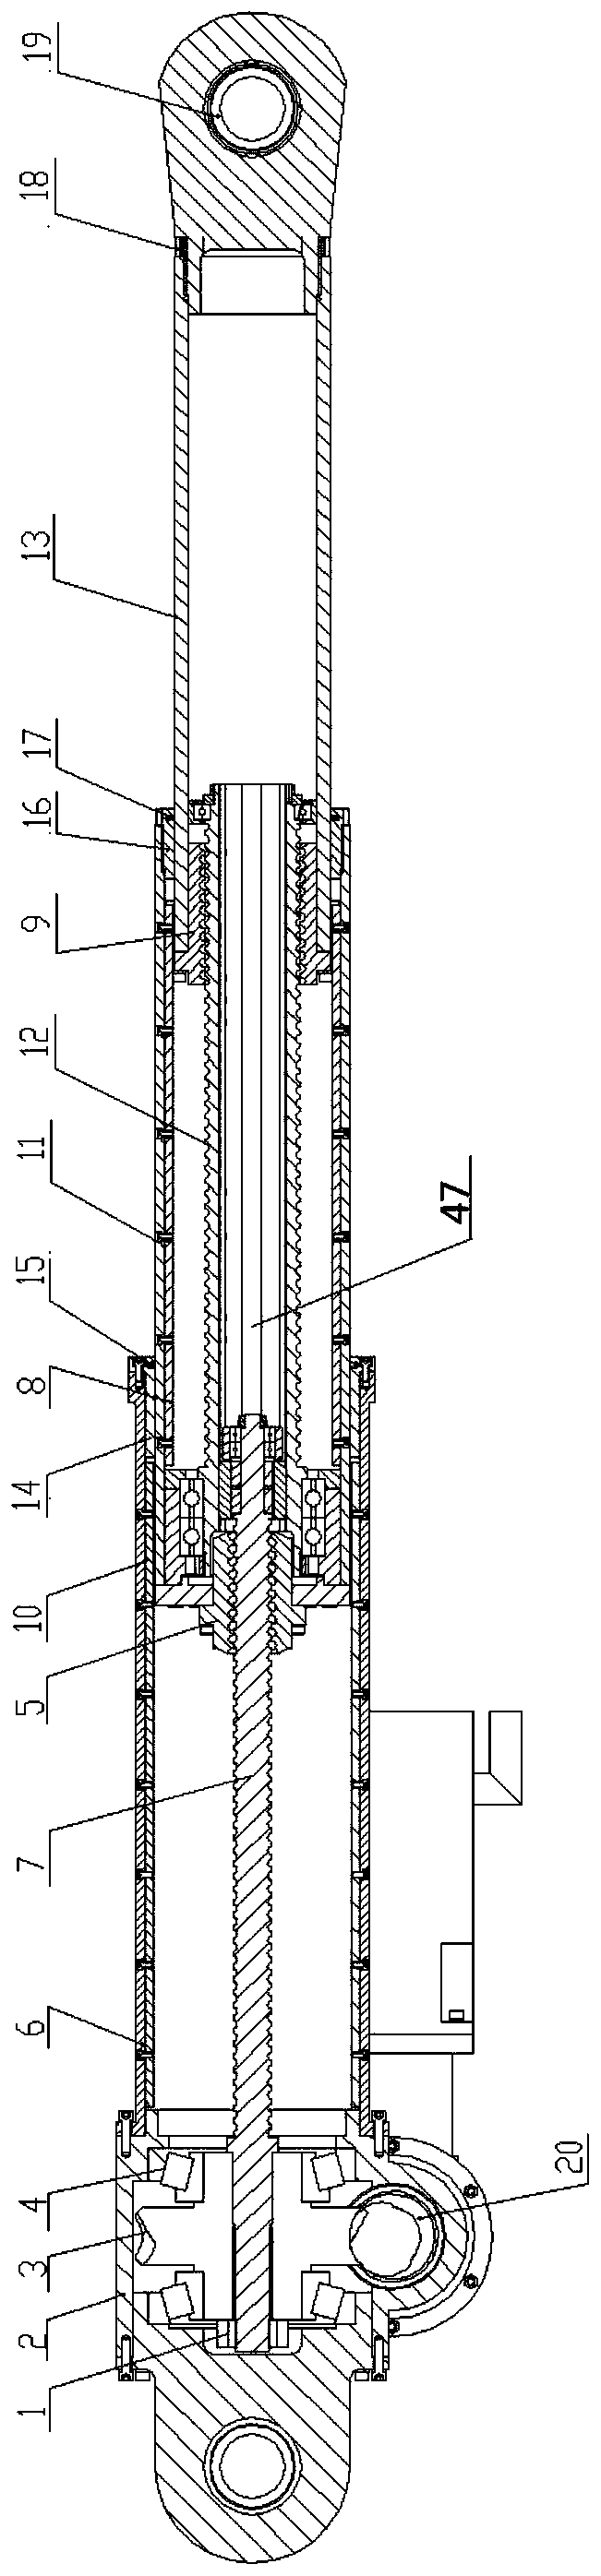 Small-volume heavy-duty multi-stage electric cylinder